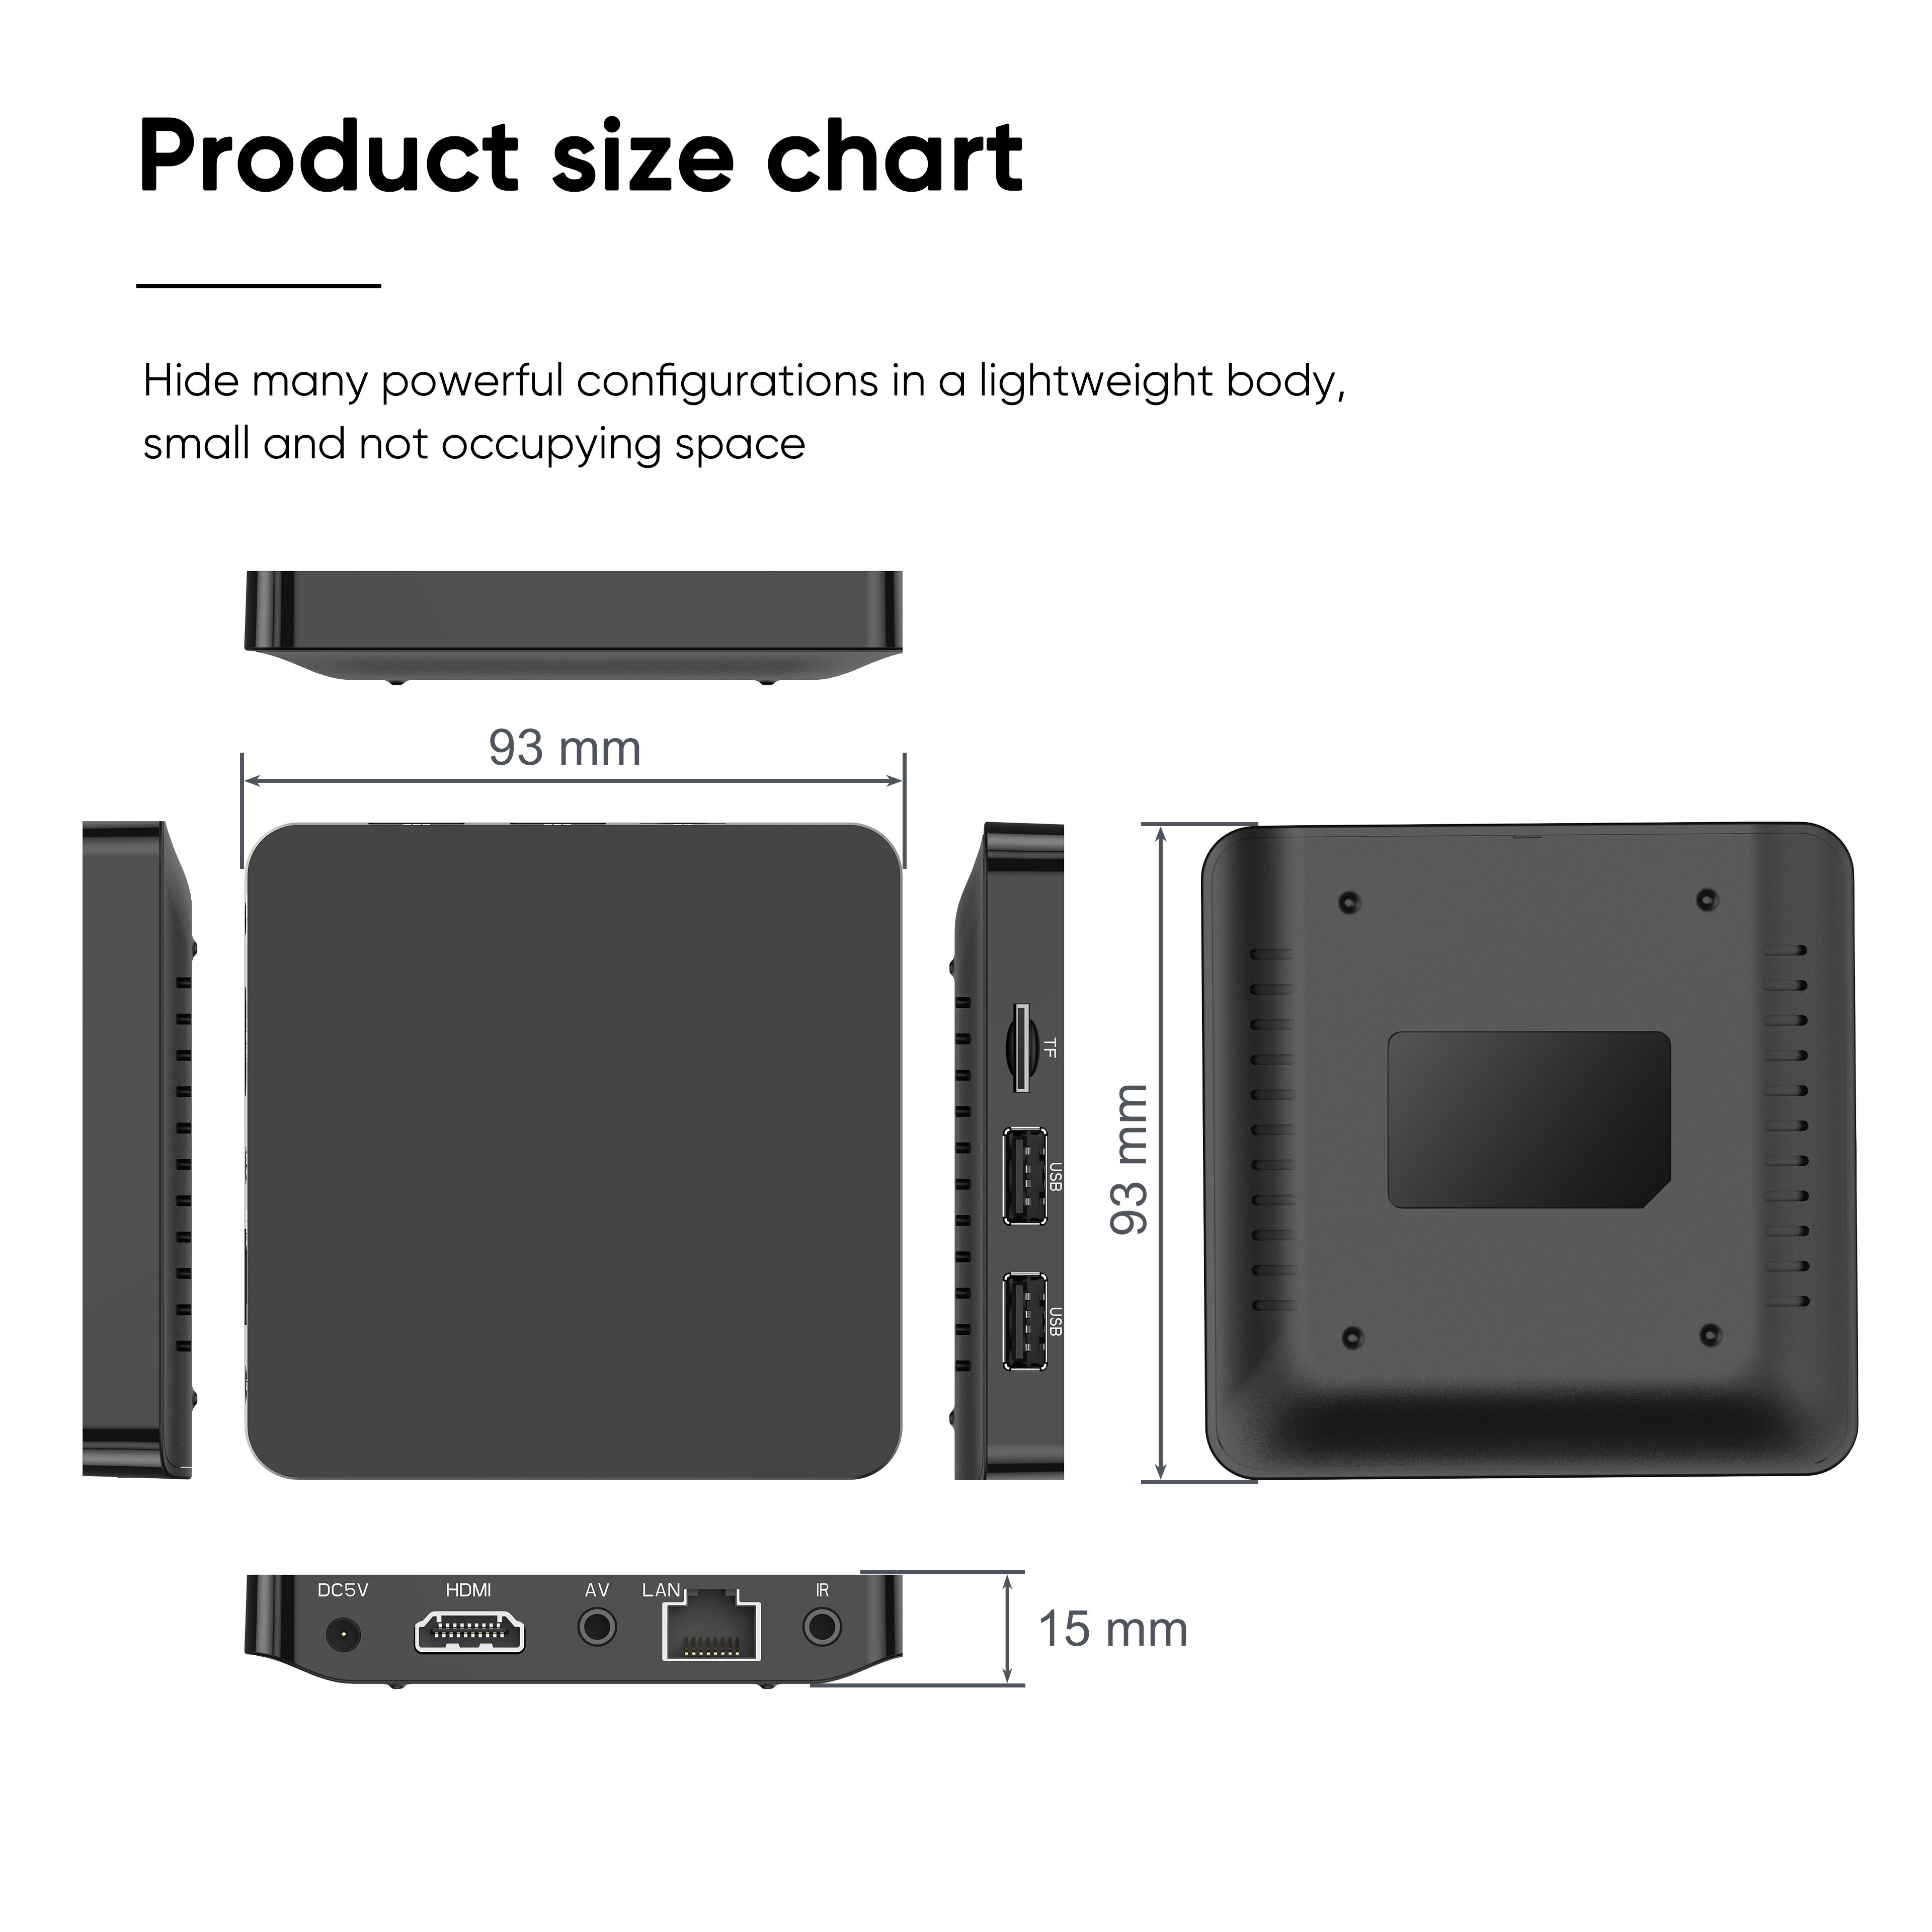 Elebao cost-effective Streaming TV Box V2pro H313 2.4/5G dual band wifi Android TV Box supplier